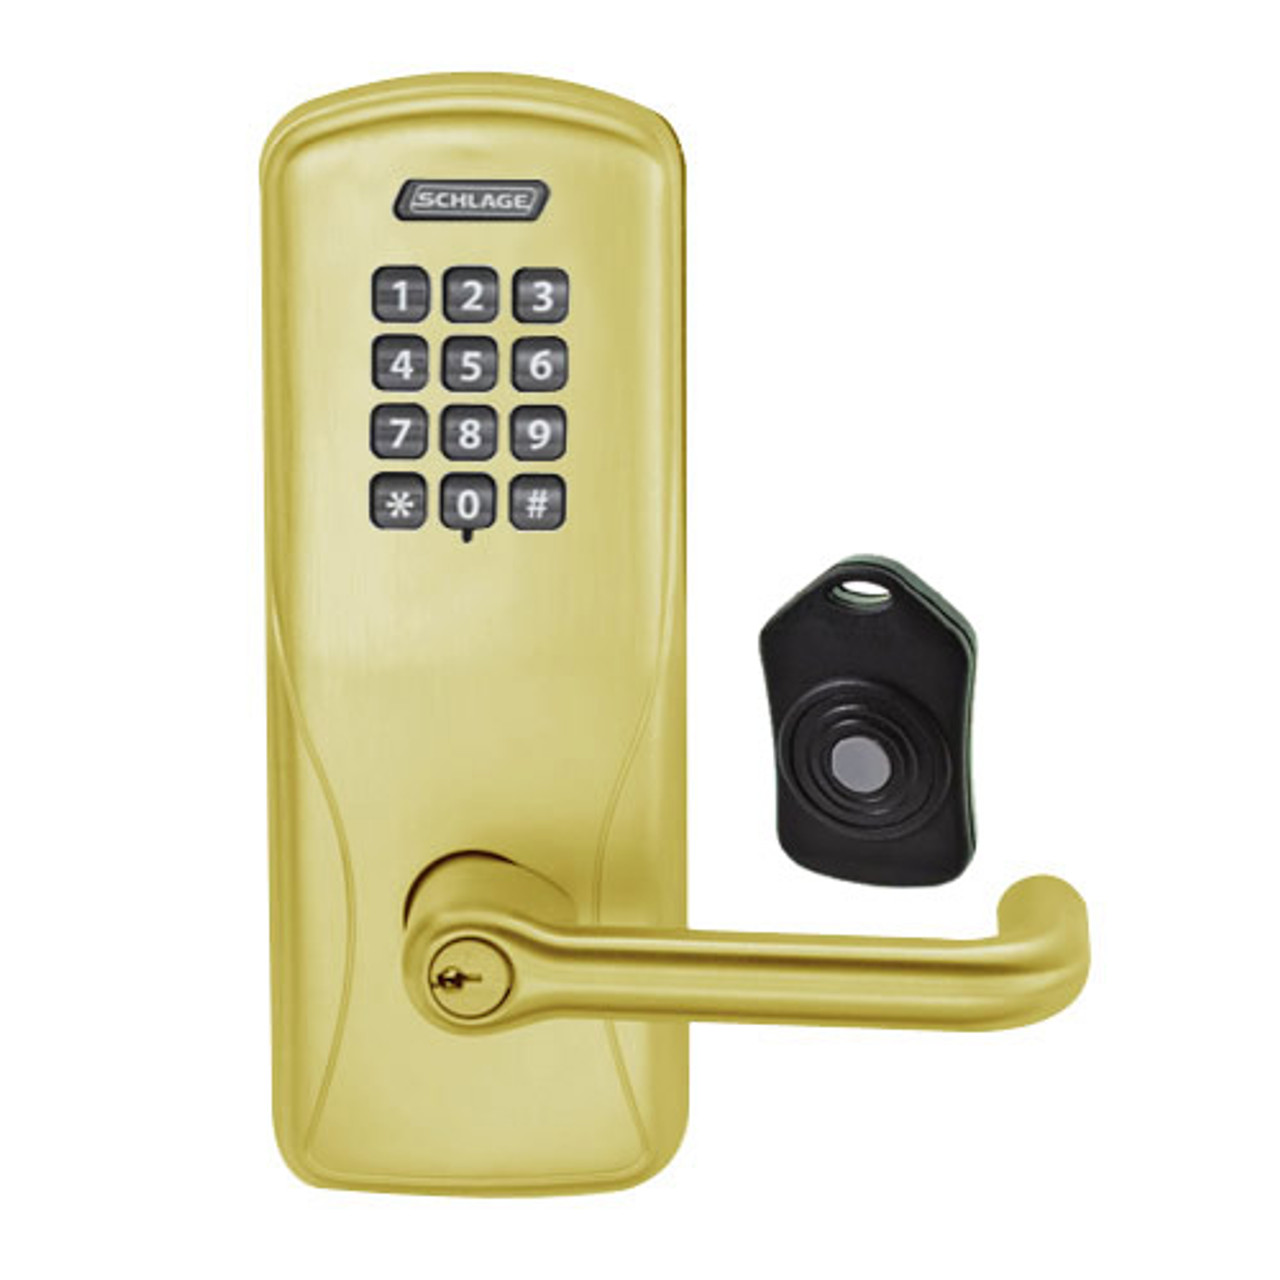 CO220-CY-75-KP-TLR-PD-606 Schlage Standalone Classroom Lockdown Solution Cylindrical Keypad locks in Satin Brass